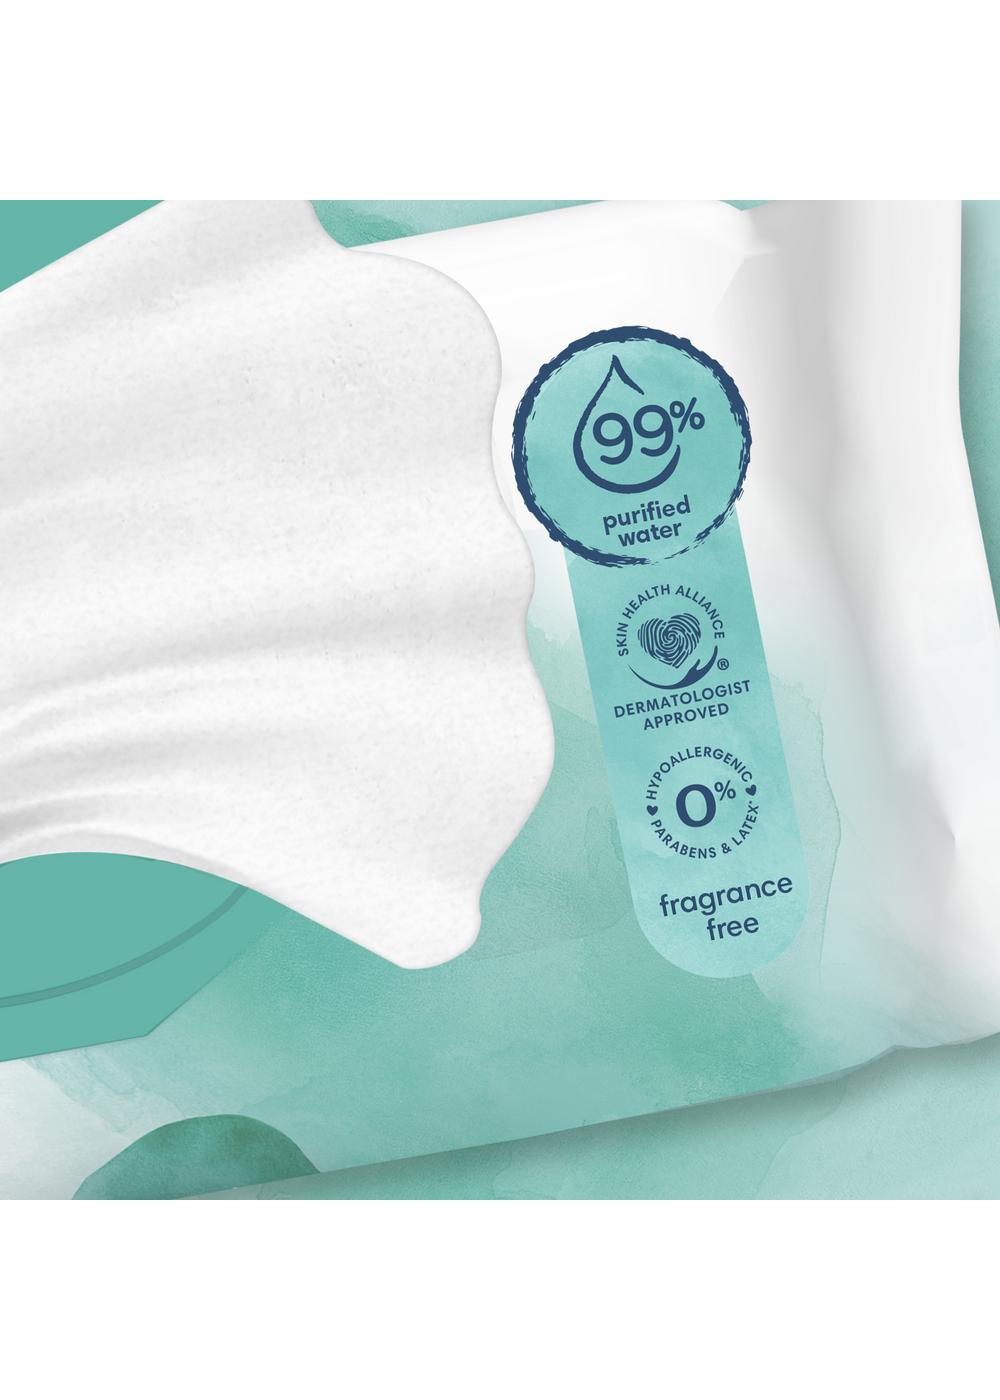 Pampers Aqua Pure Baby Wipes 6 Pk; image 2 of 7